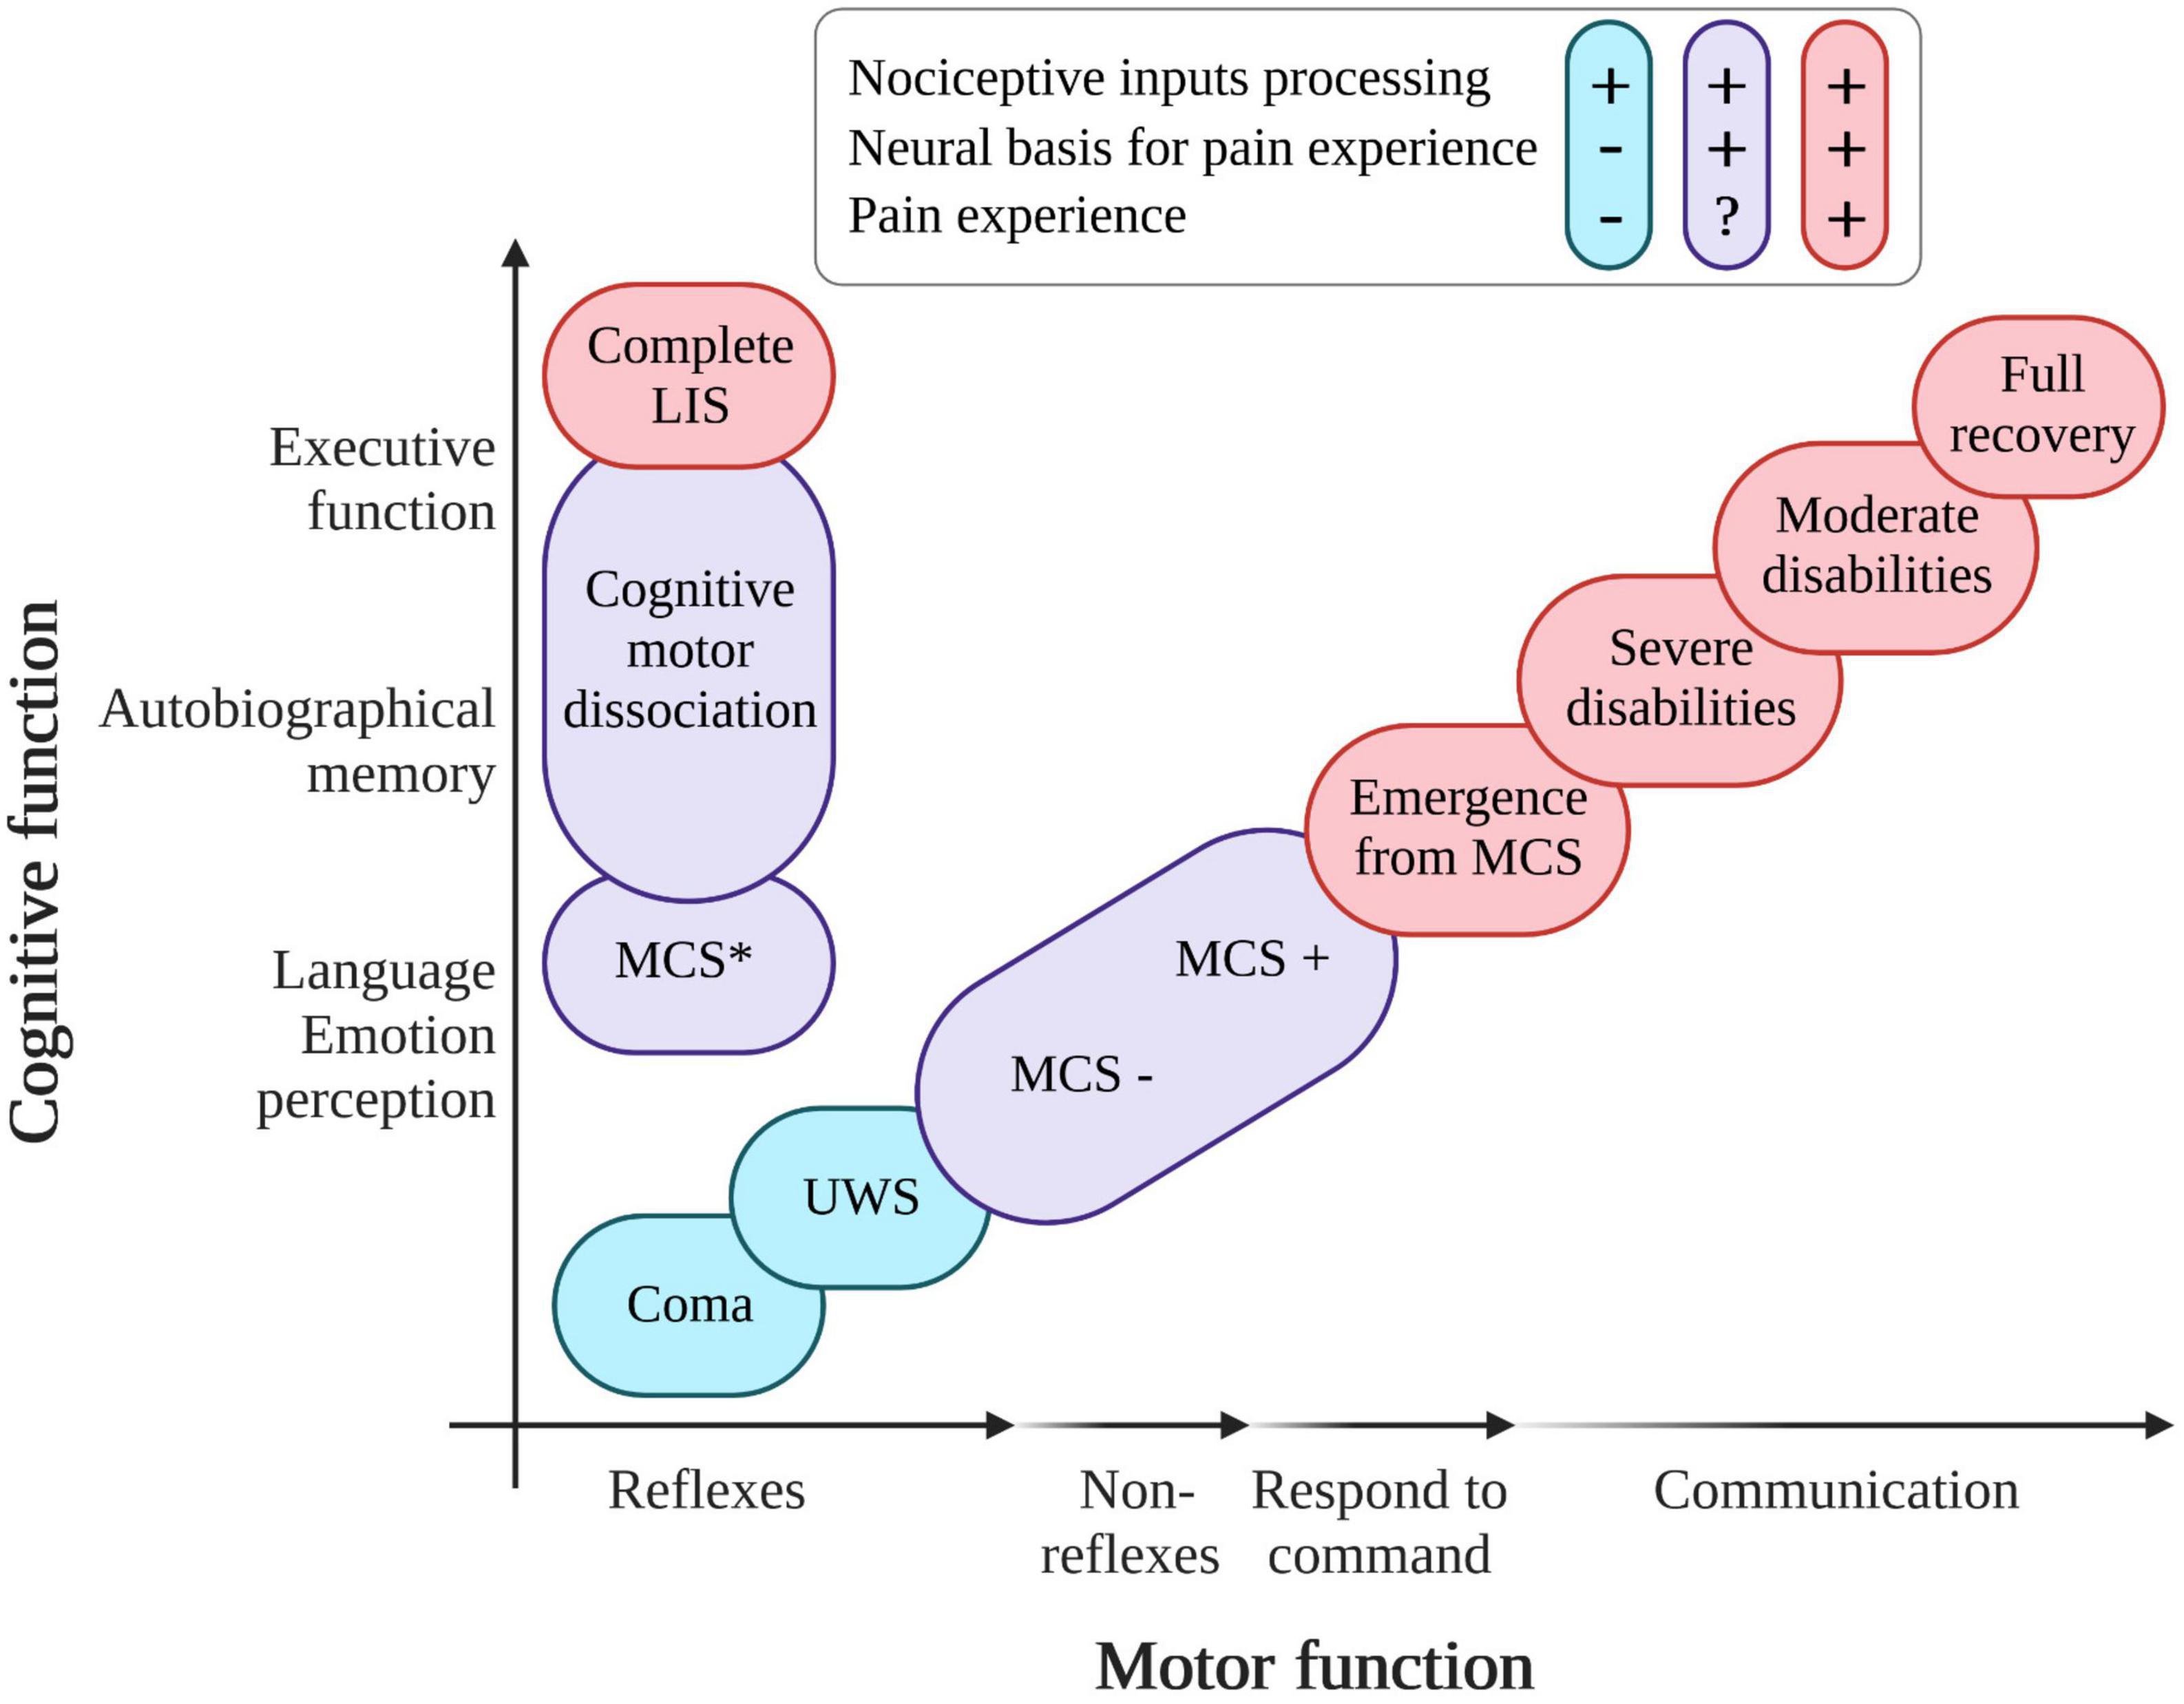 Frontiers Assessment and management of pain/nociception in patients with disorders of consciousness or locked-in syndrome A narrative review photo pic